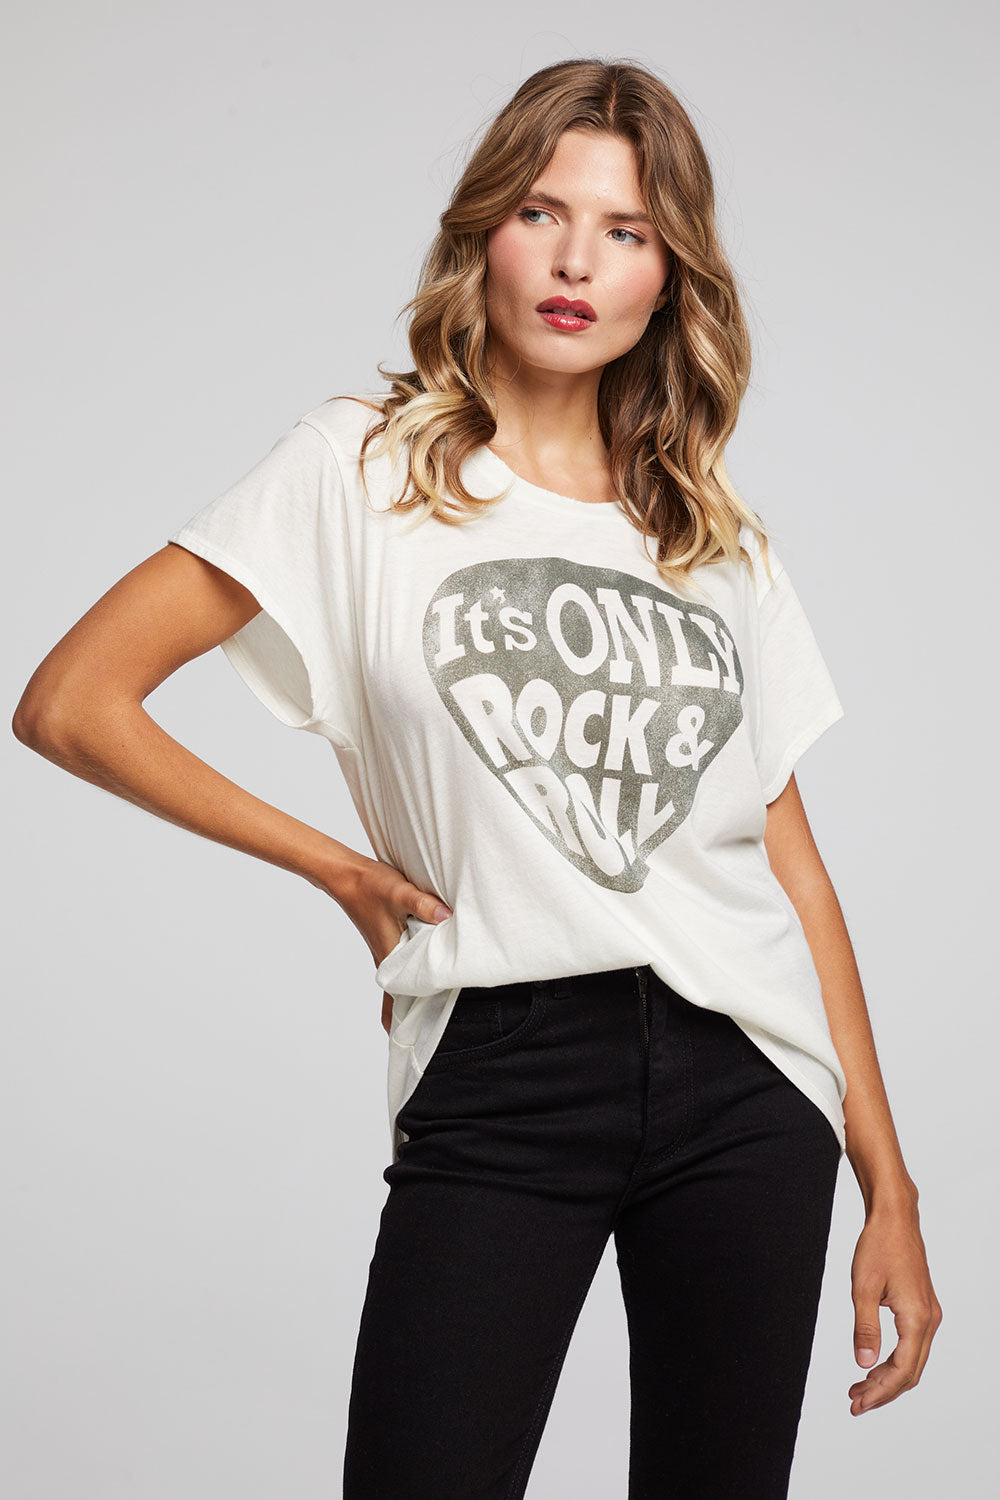 Only Rock & Roll Tee WOMENS chaserbrand